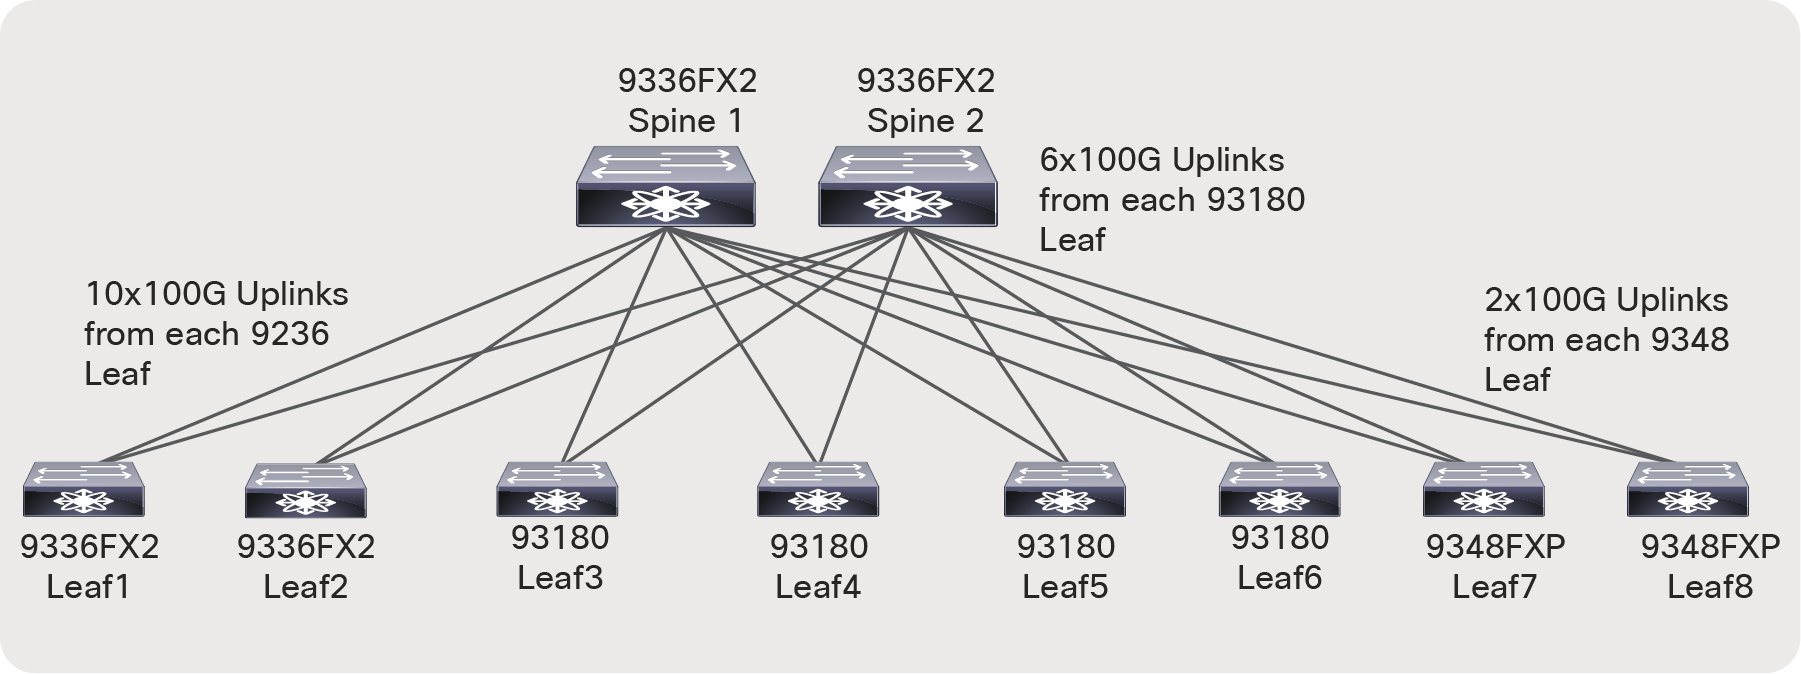 Network topology with a Nexus 9336FX2 Switch as the spine